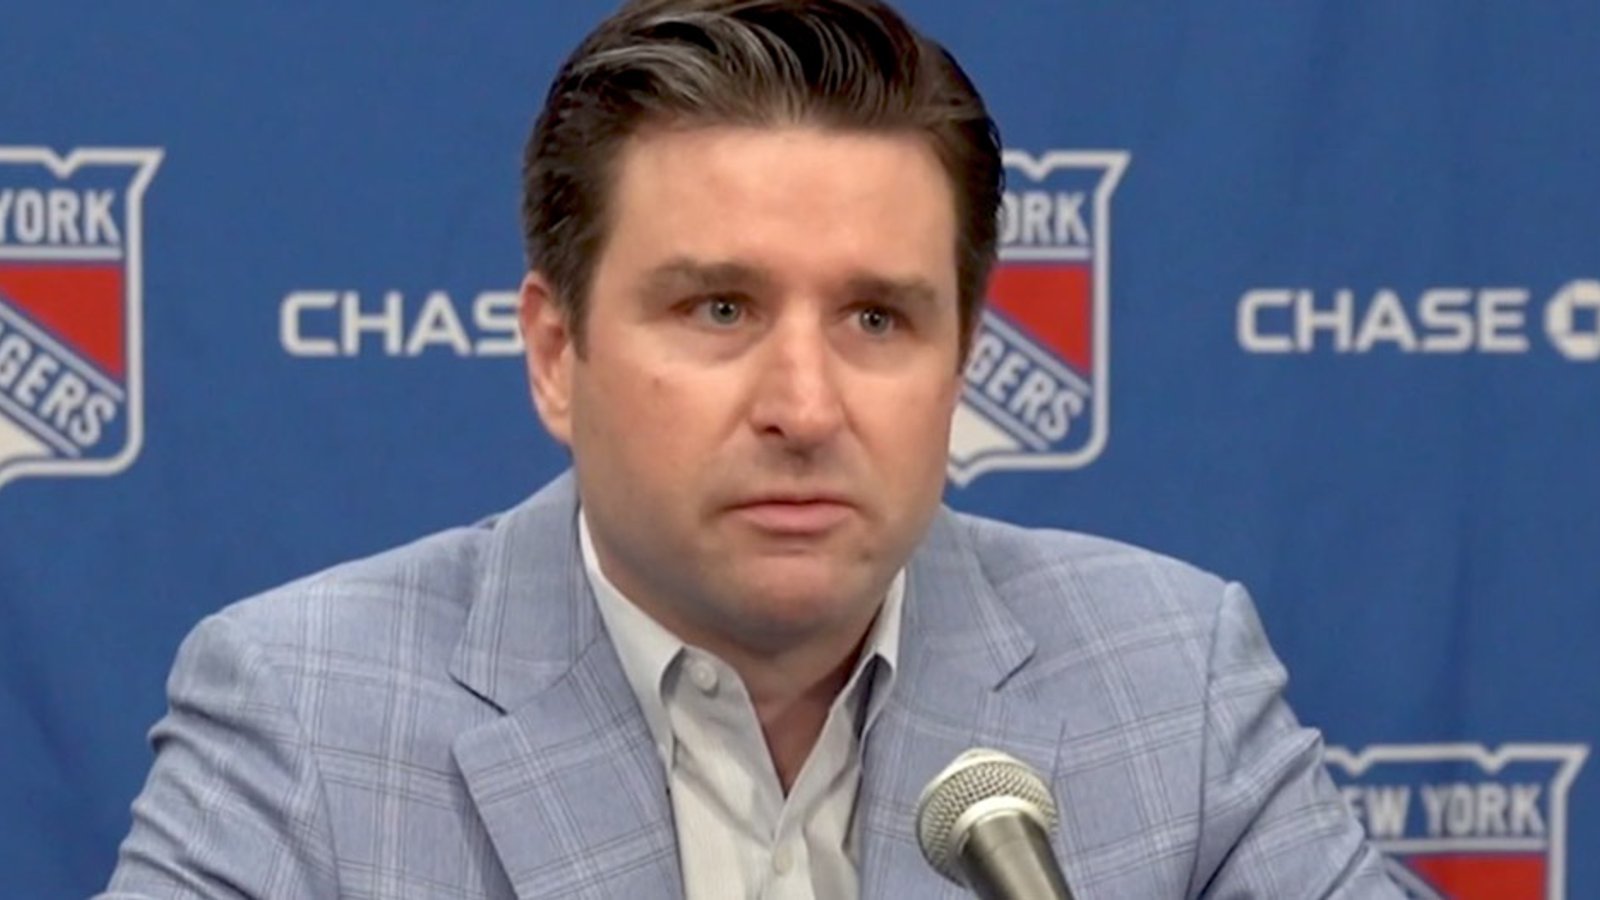 New York Rangers GM Chris Drury has a message for fans 